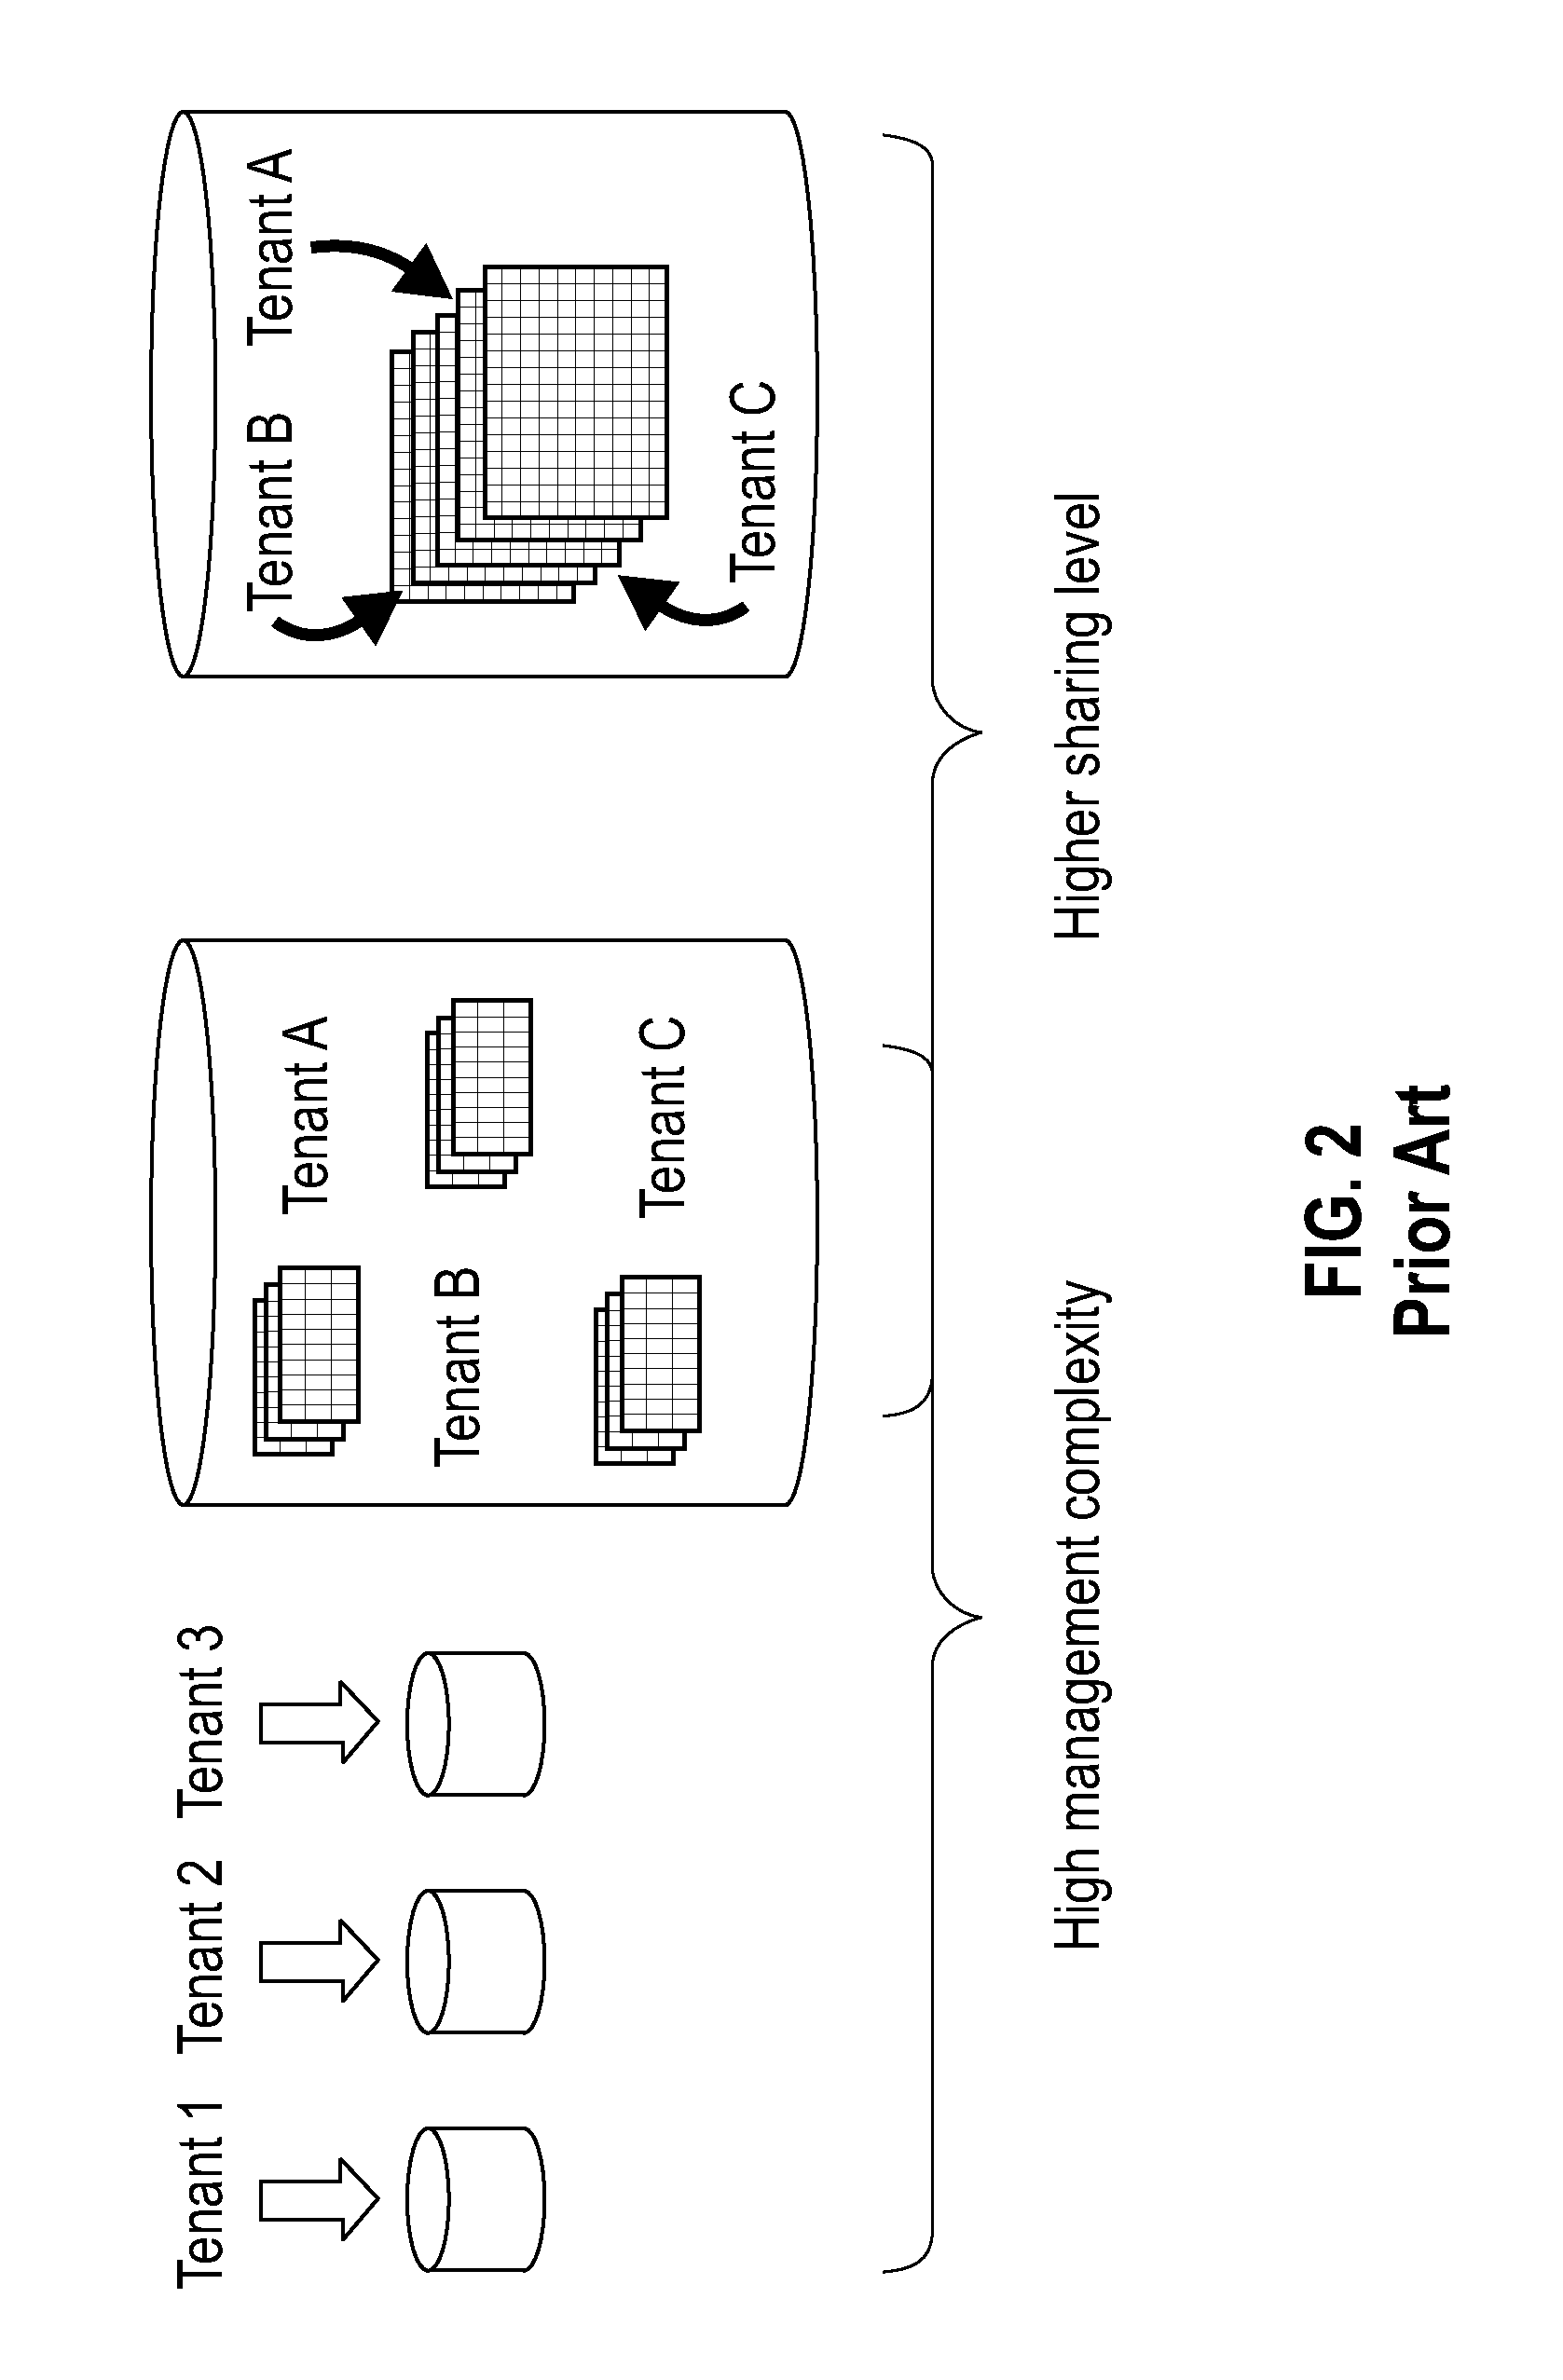 Multi-tenancy data storage and access method and apparatus